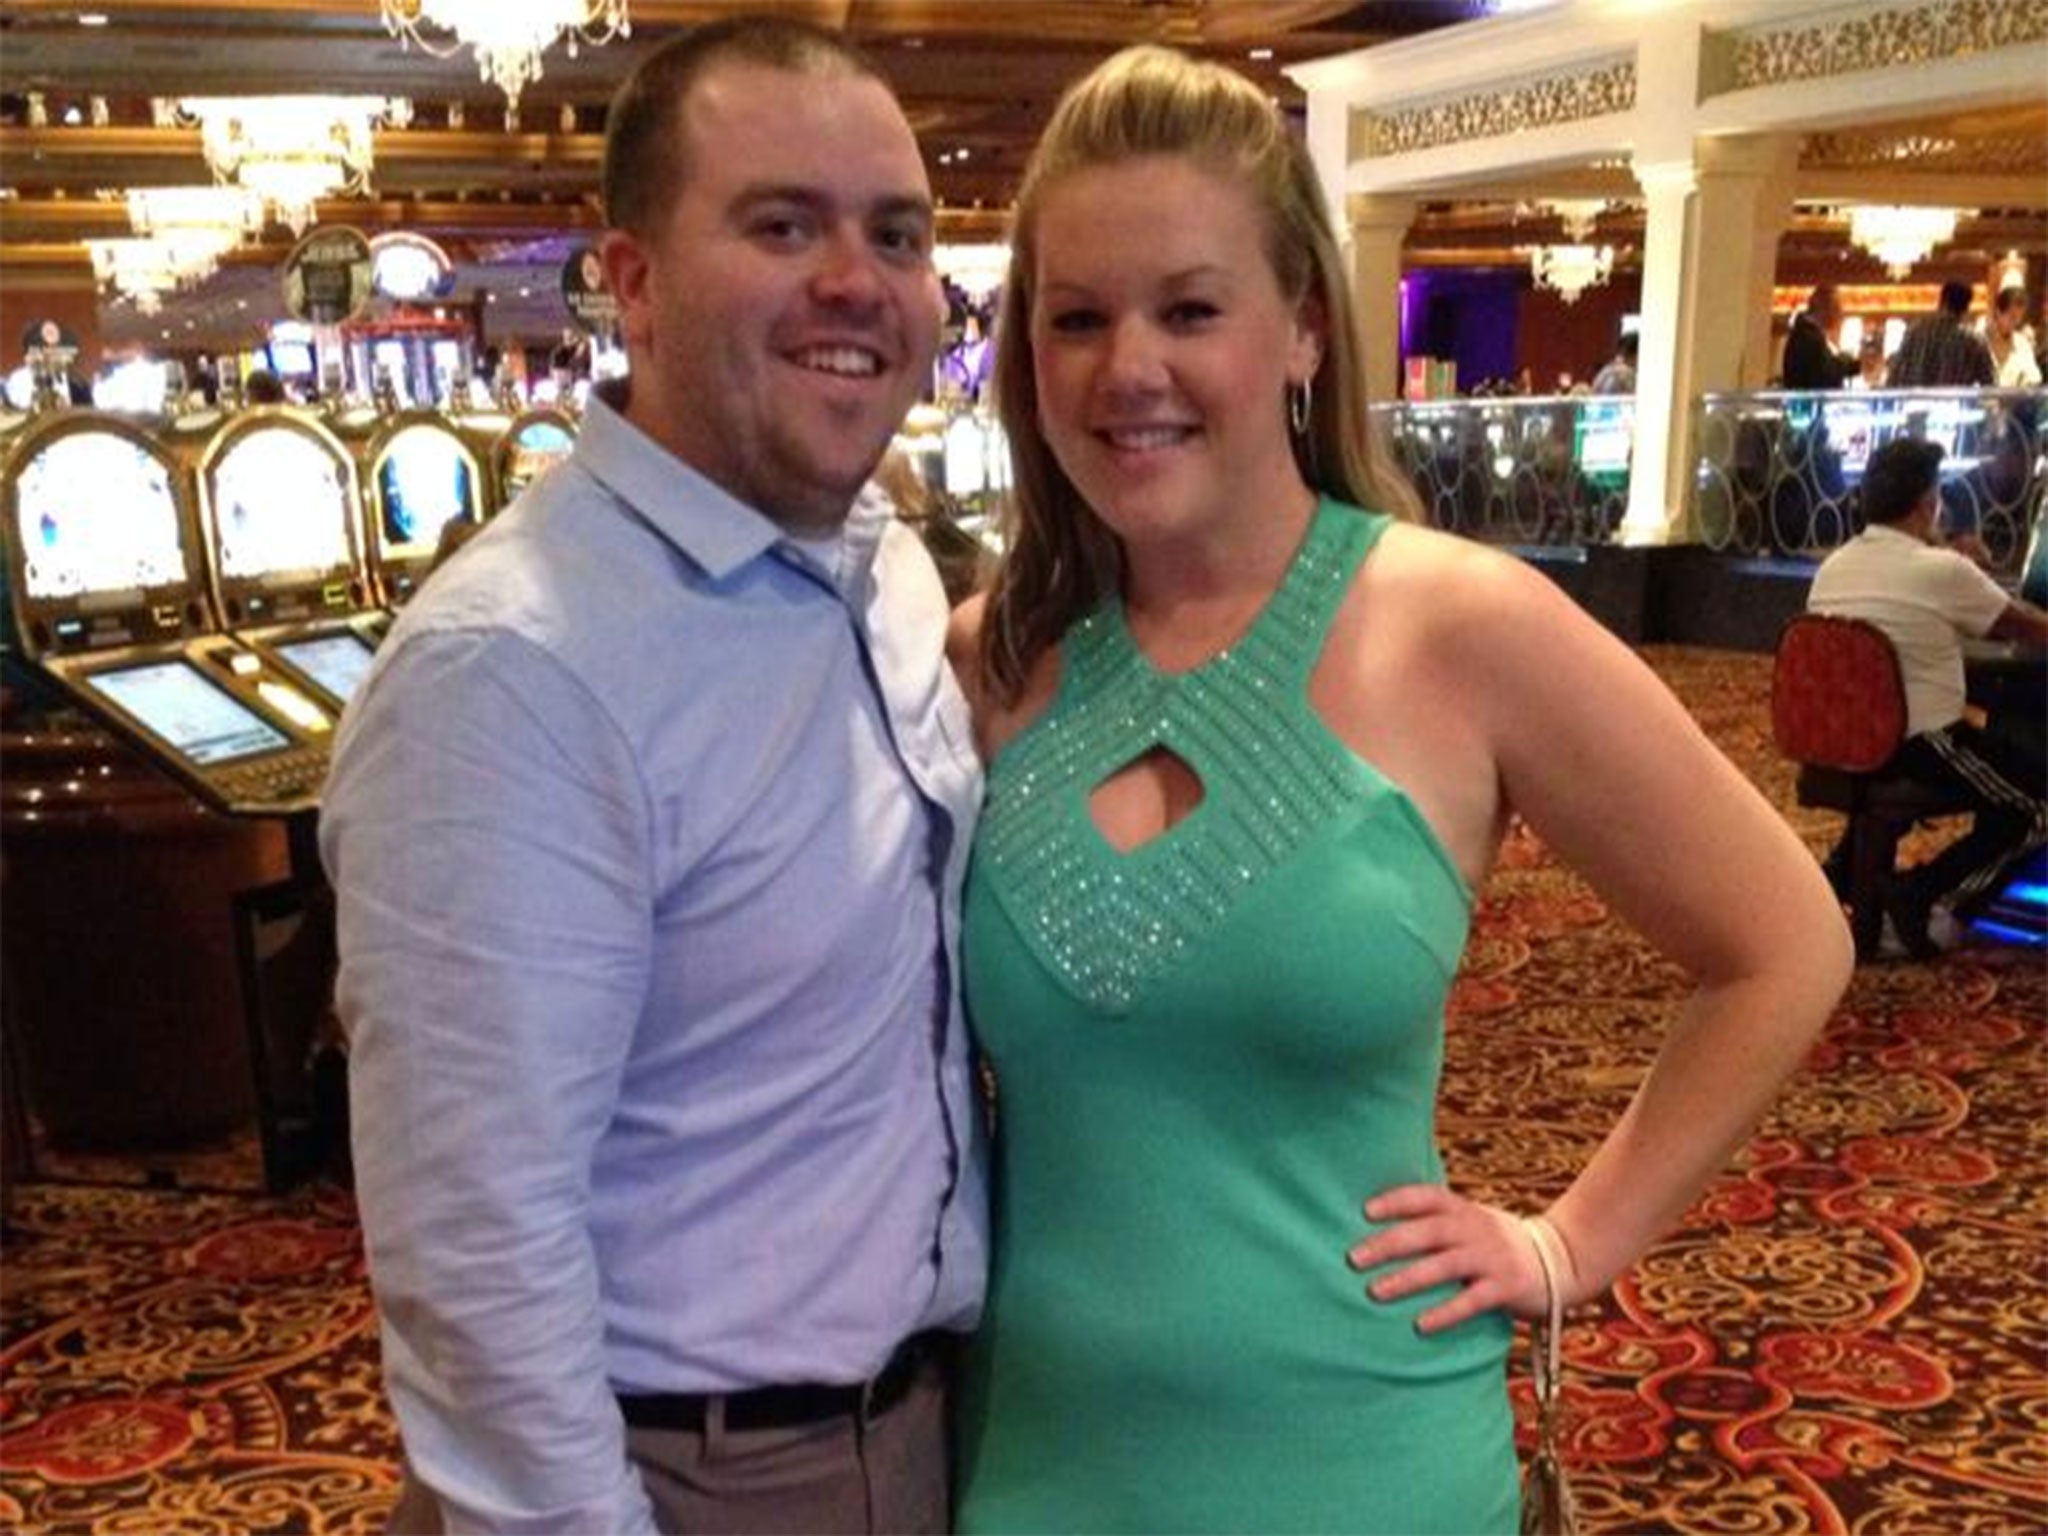 Adam Ward and his fiancee Melissa Ott, who was reportedly working in the control room during her last shift at WDBJ when the shooting occurred